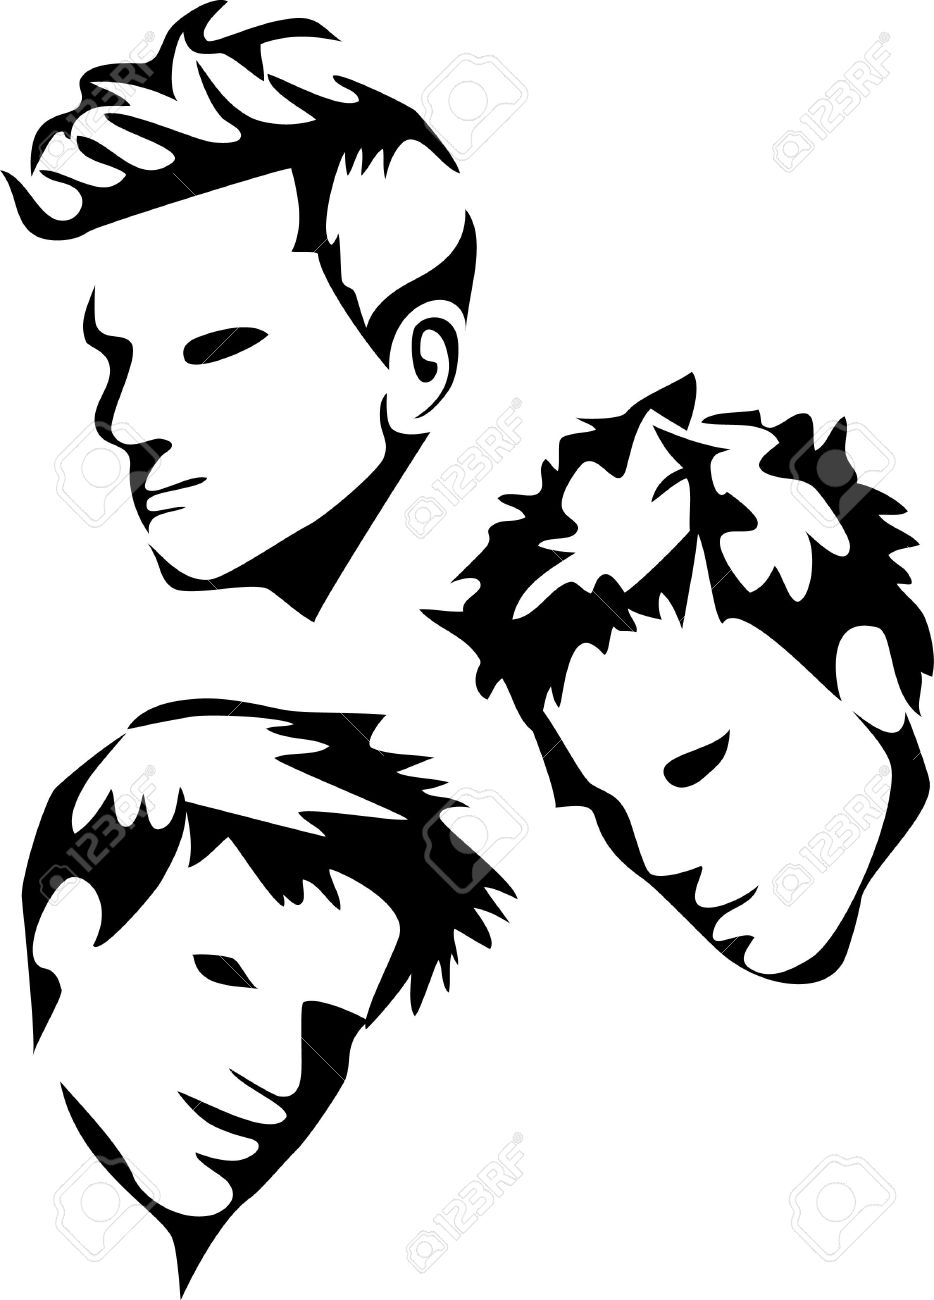 Hairstyles free download best. Haircut clipart hairstyle